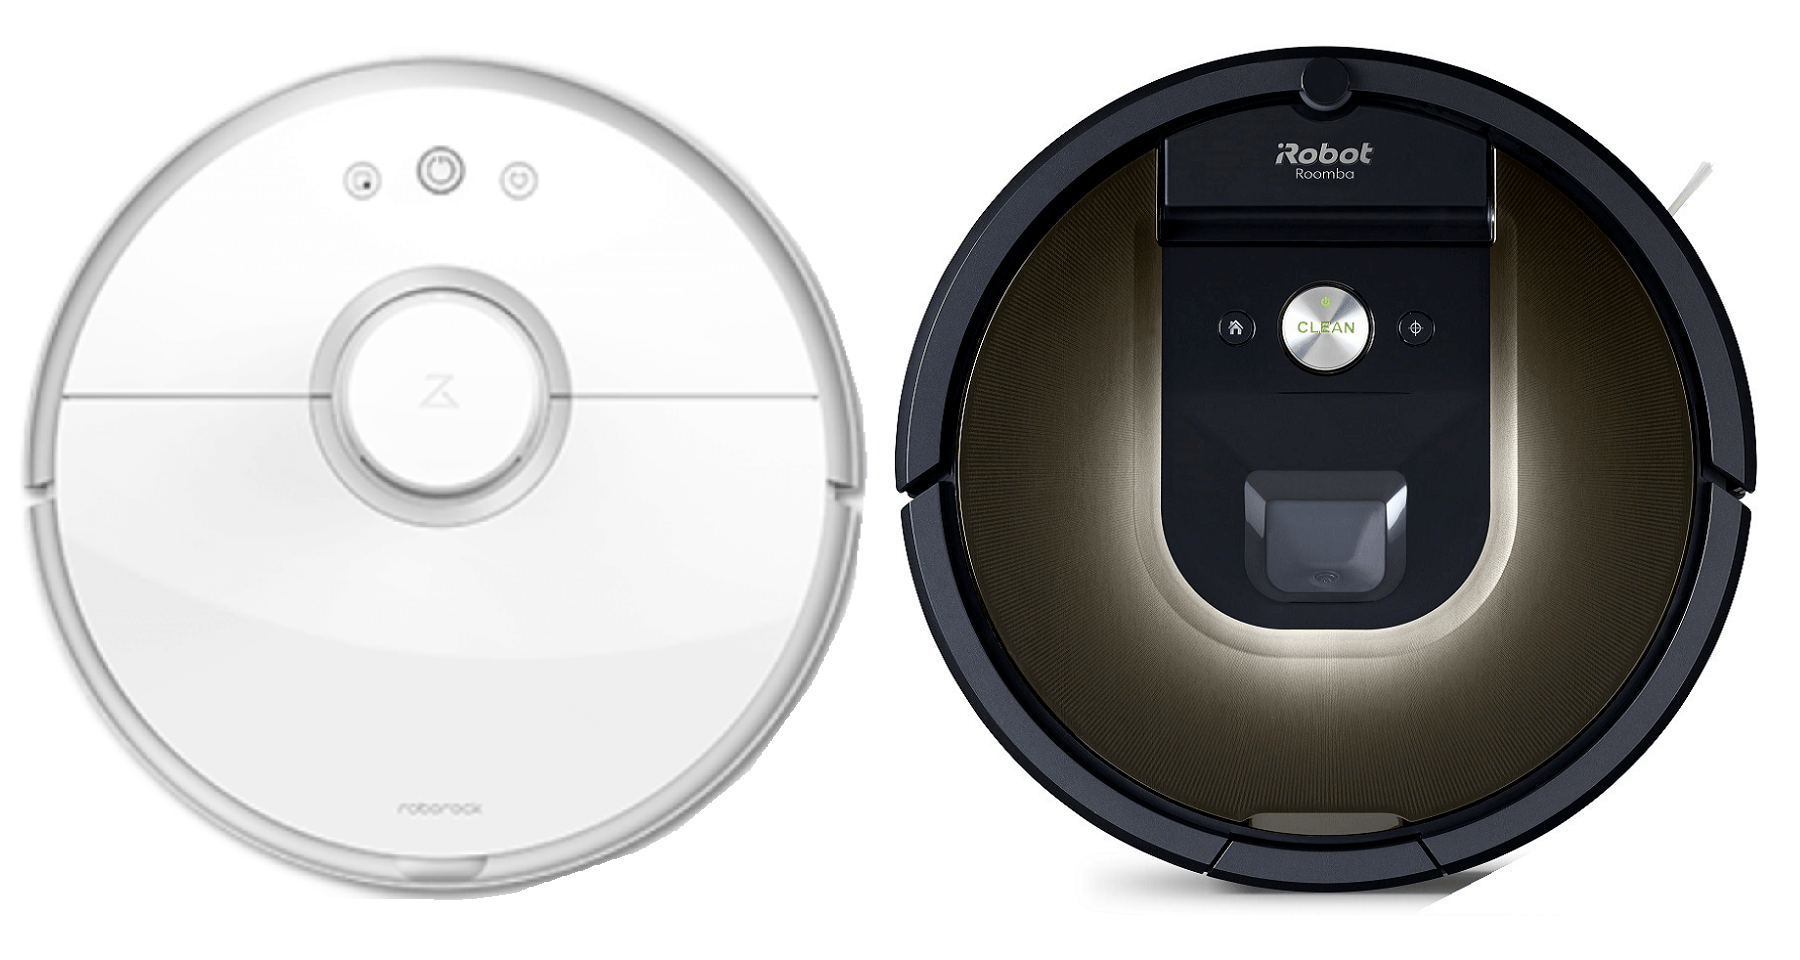 Roborock vs Roomba 980 - Which One is the Better Deal?